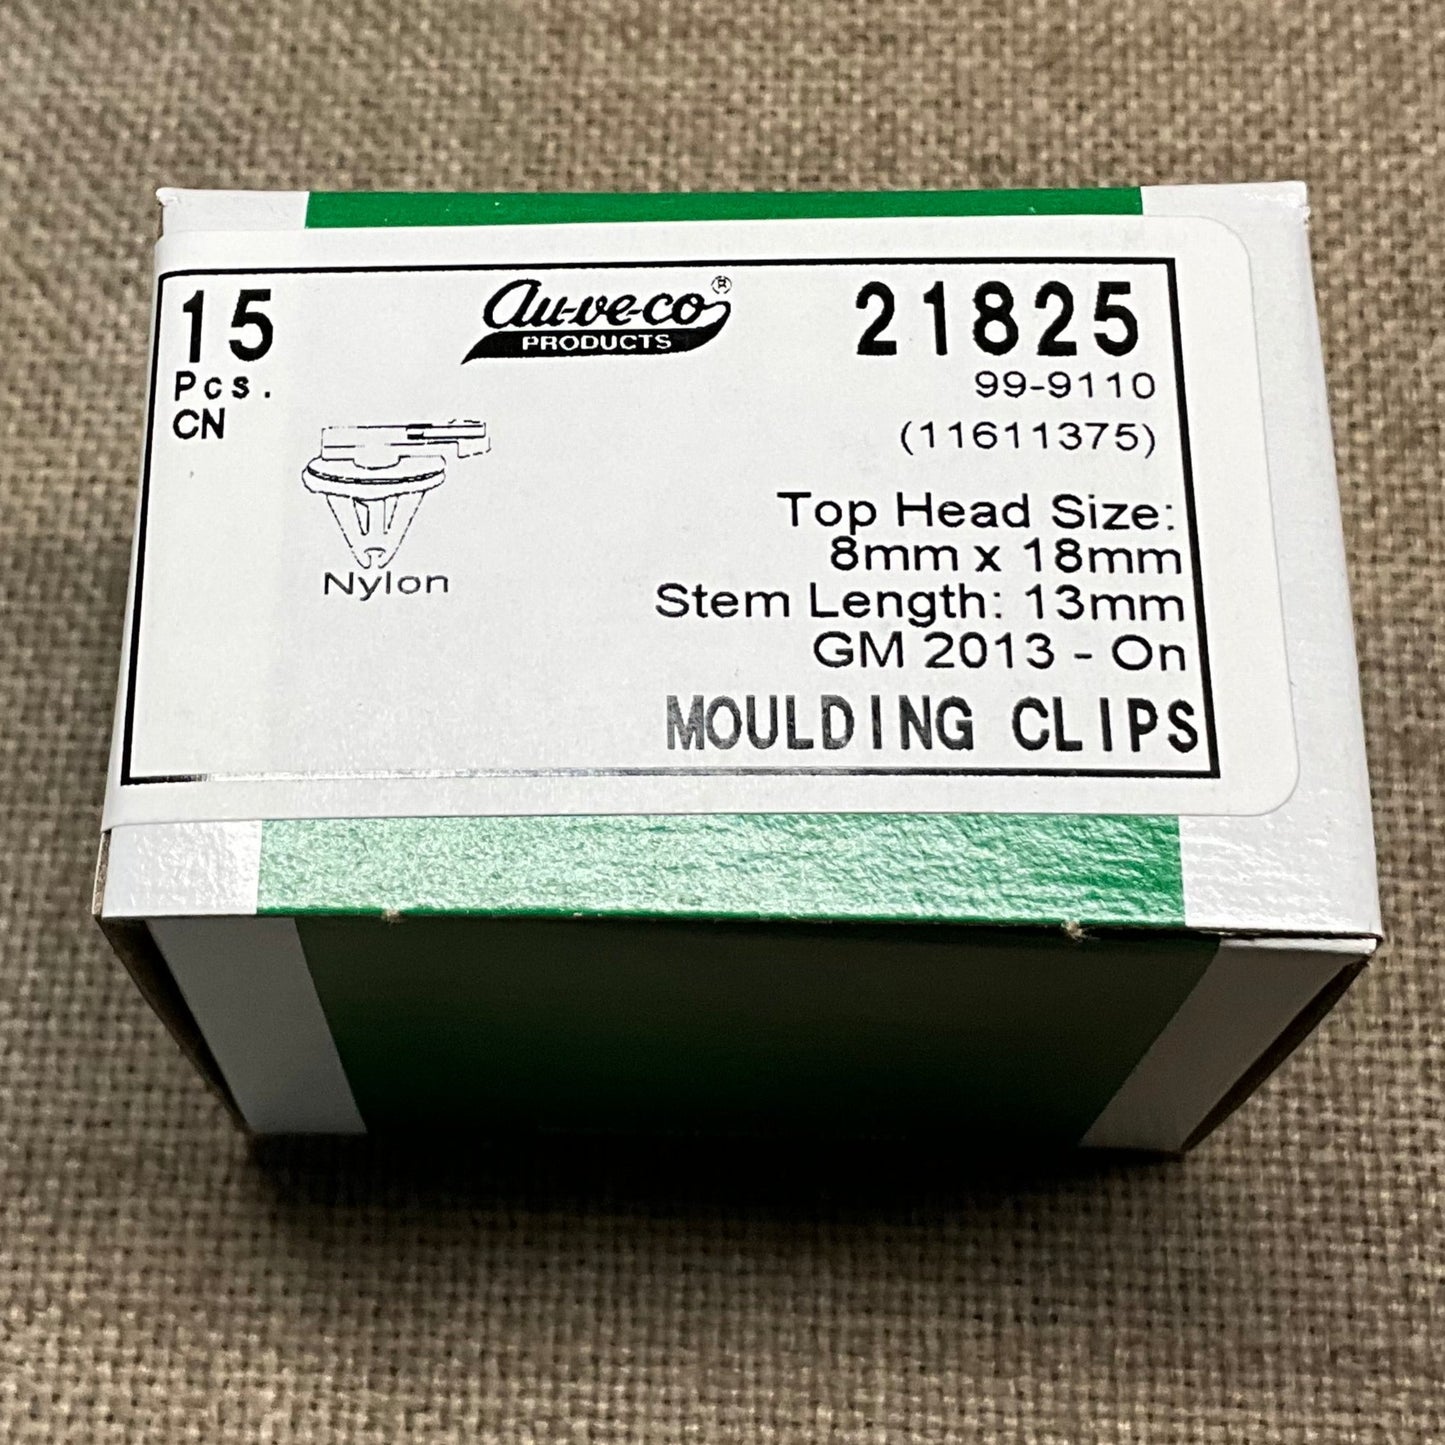 Auveco 21825 Moulding Clip With Sealer, 8x18 Top Head, for GM 11611375 (Qty: 15)